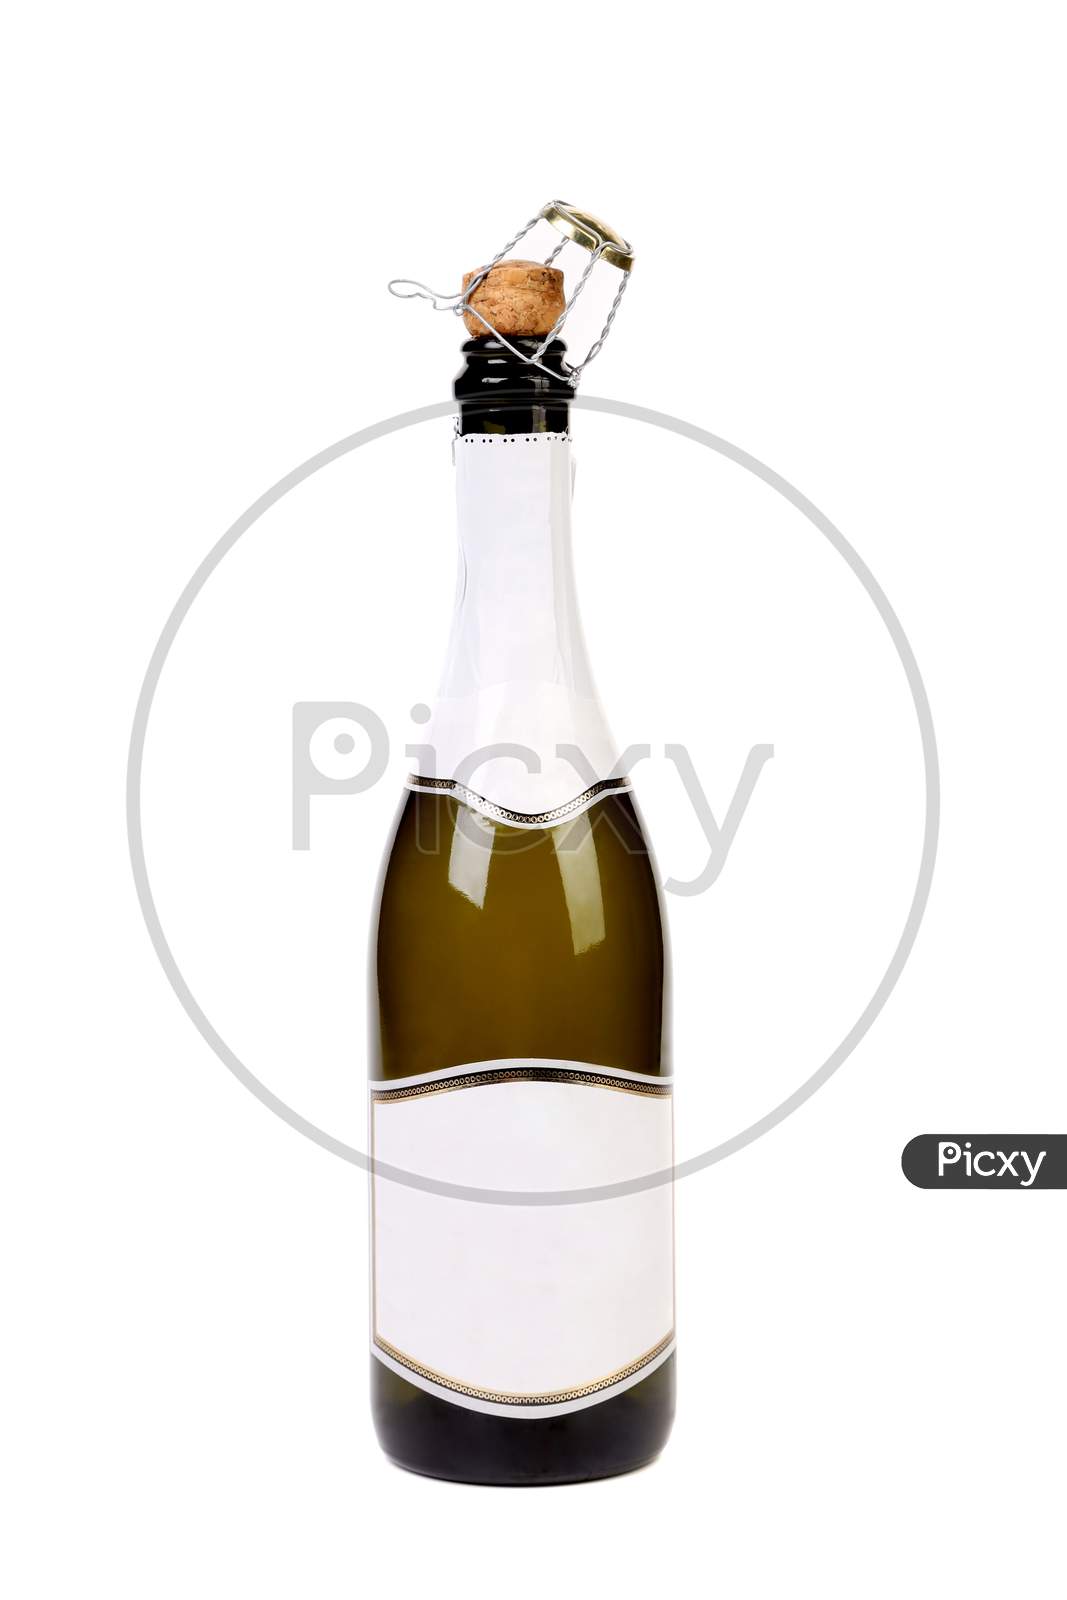 Champagne Bottle Without Top Foil. Isolated On A White Background.